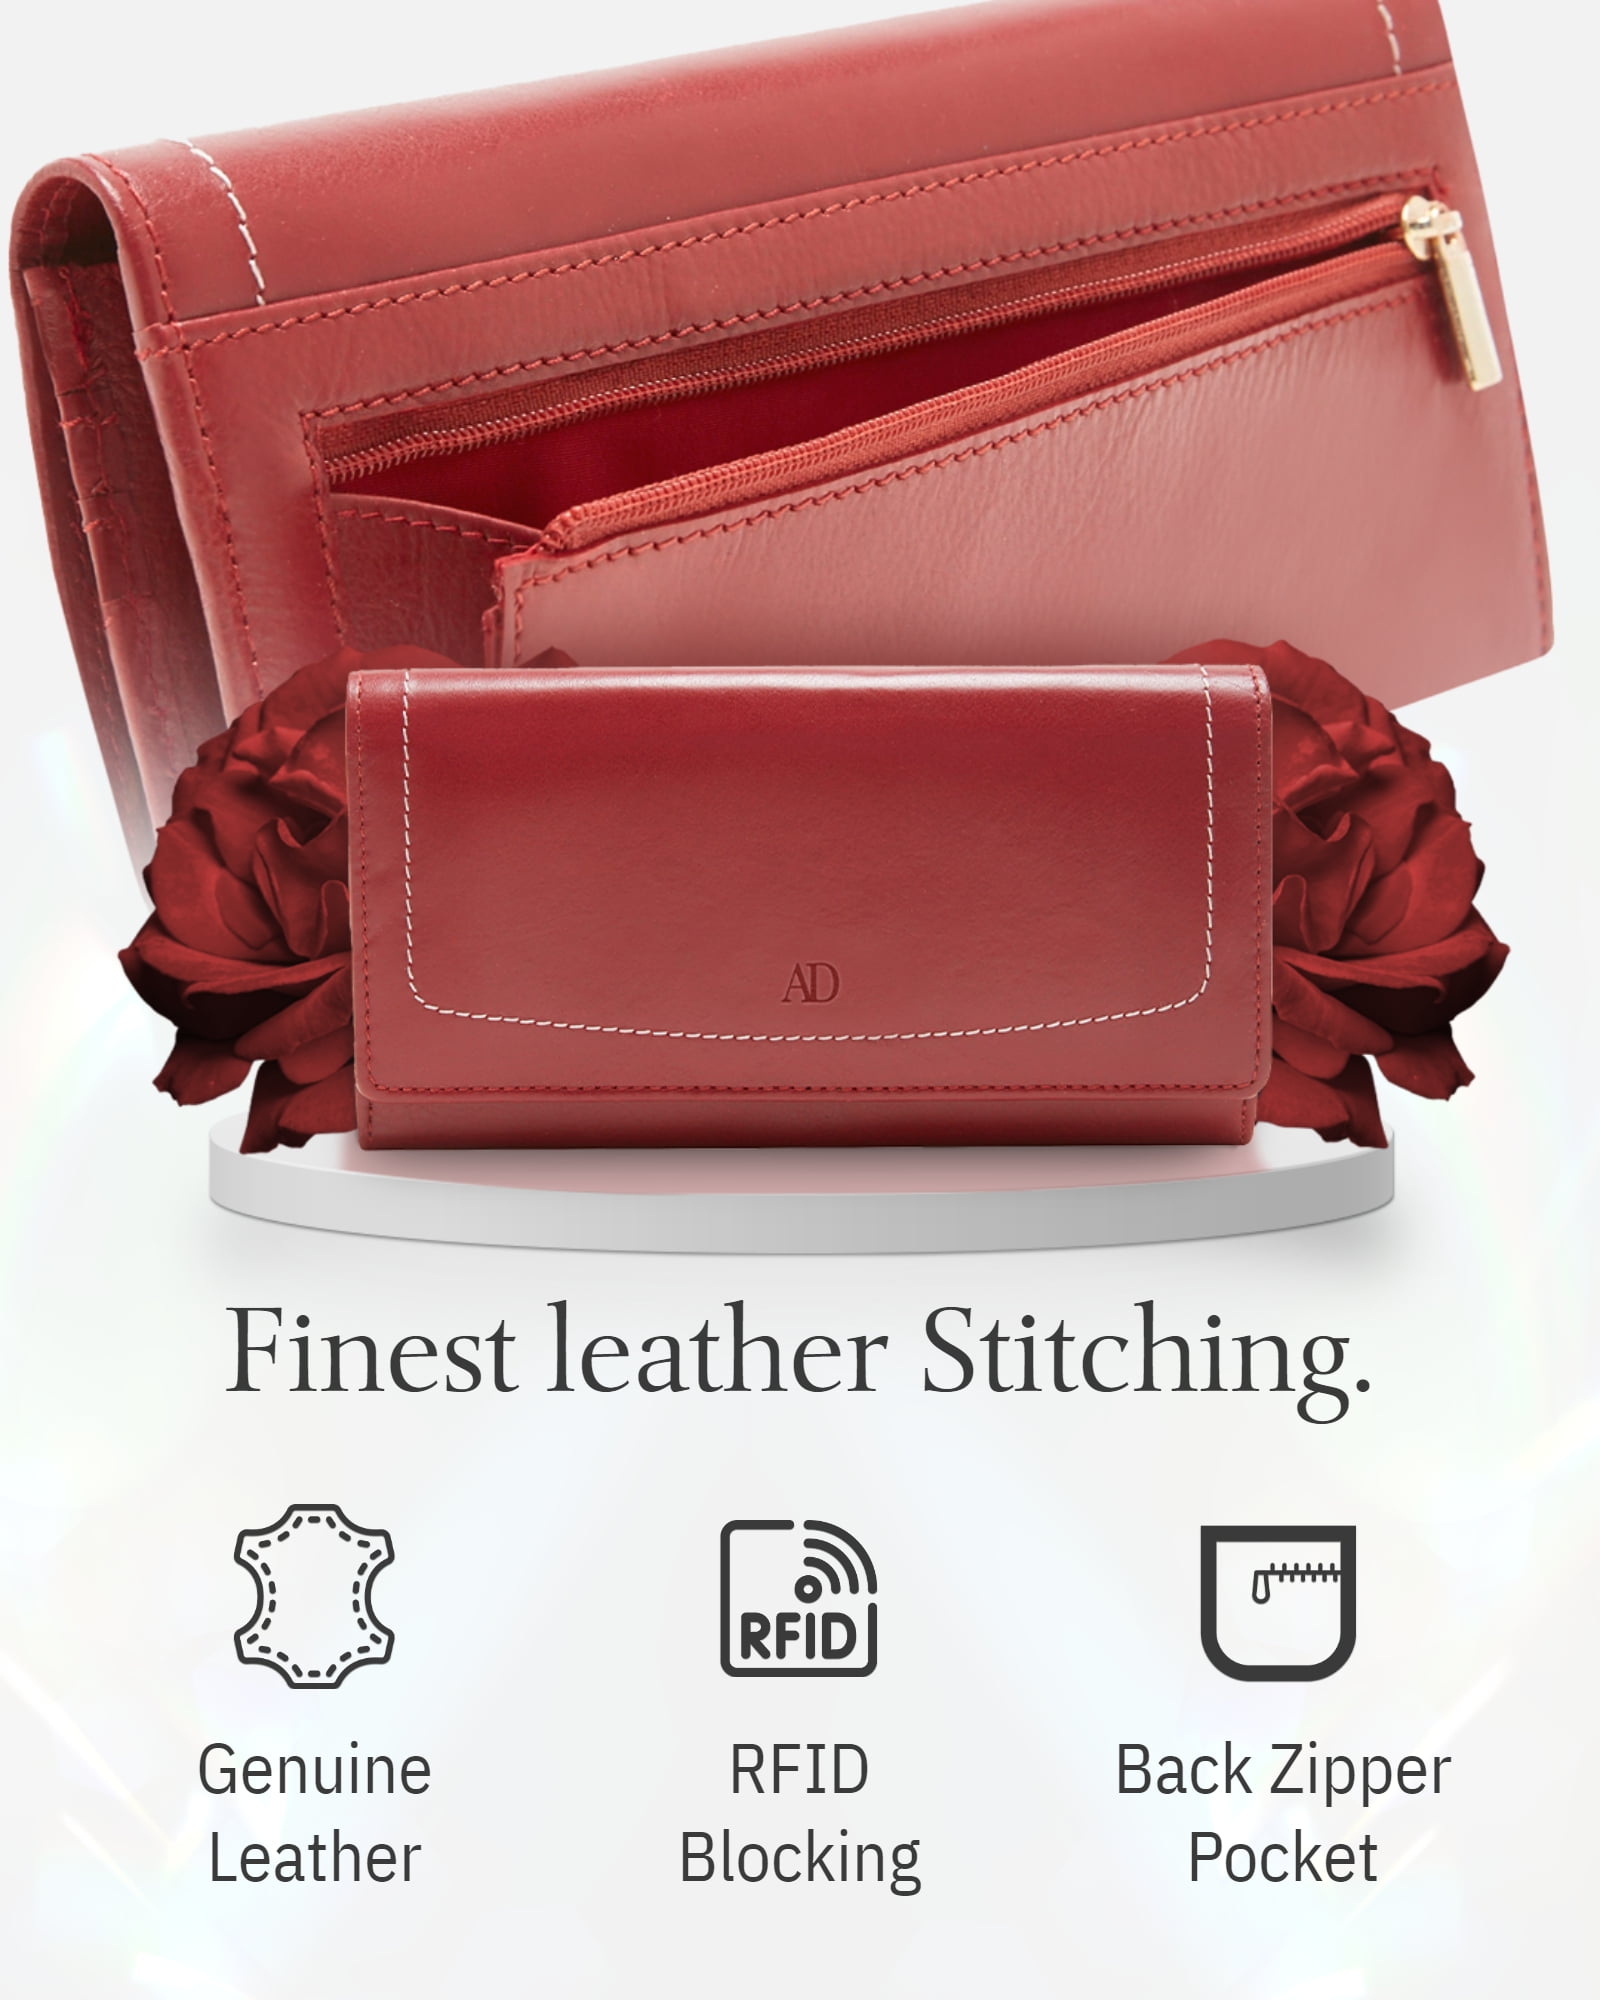 Genuine Leather Wallets For Women - Ladies Accordion Clutch Wallet With  Coin Purse Pocket And ID Window RFID Blocking 